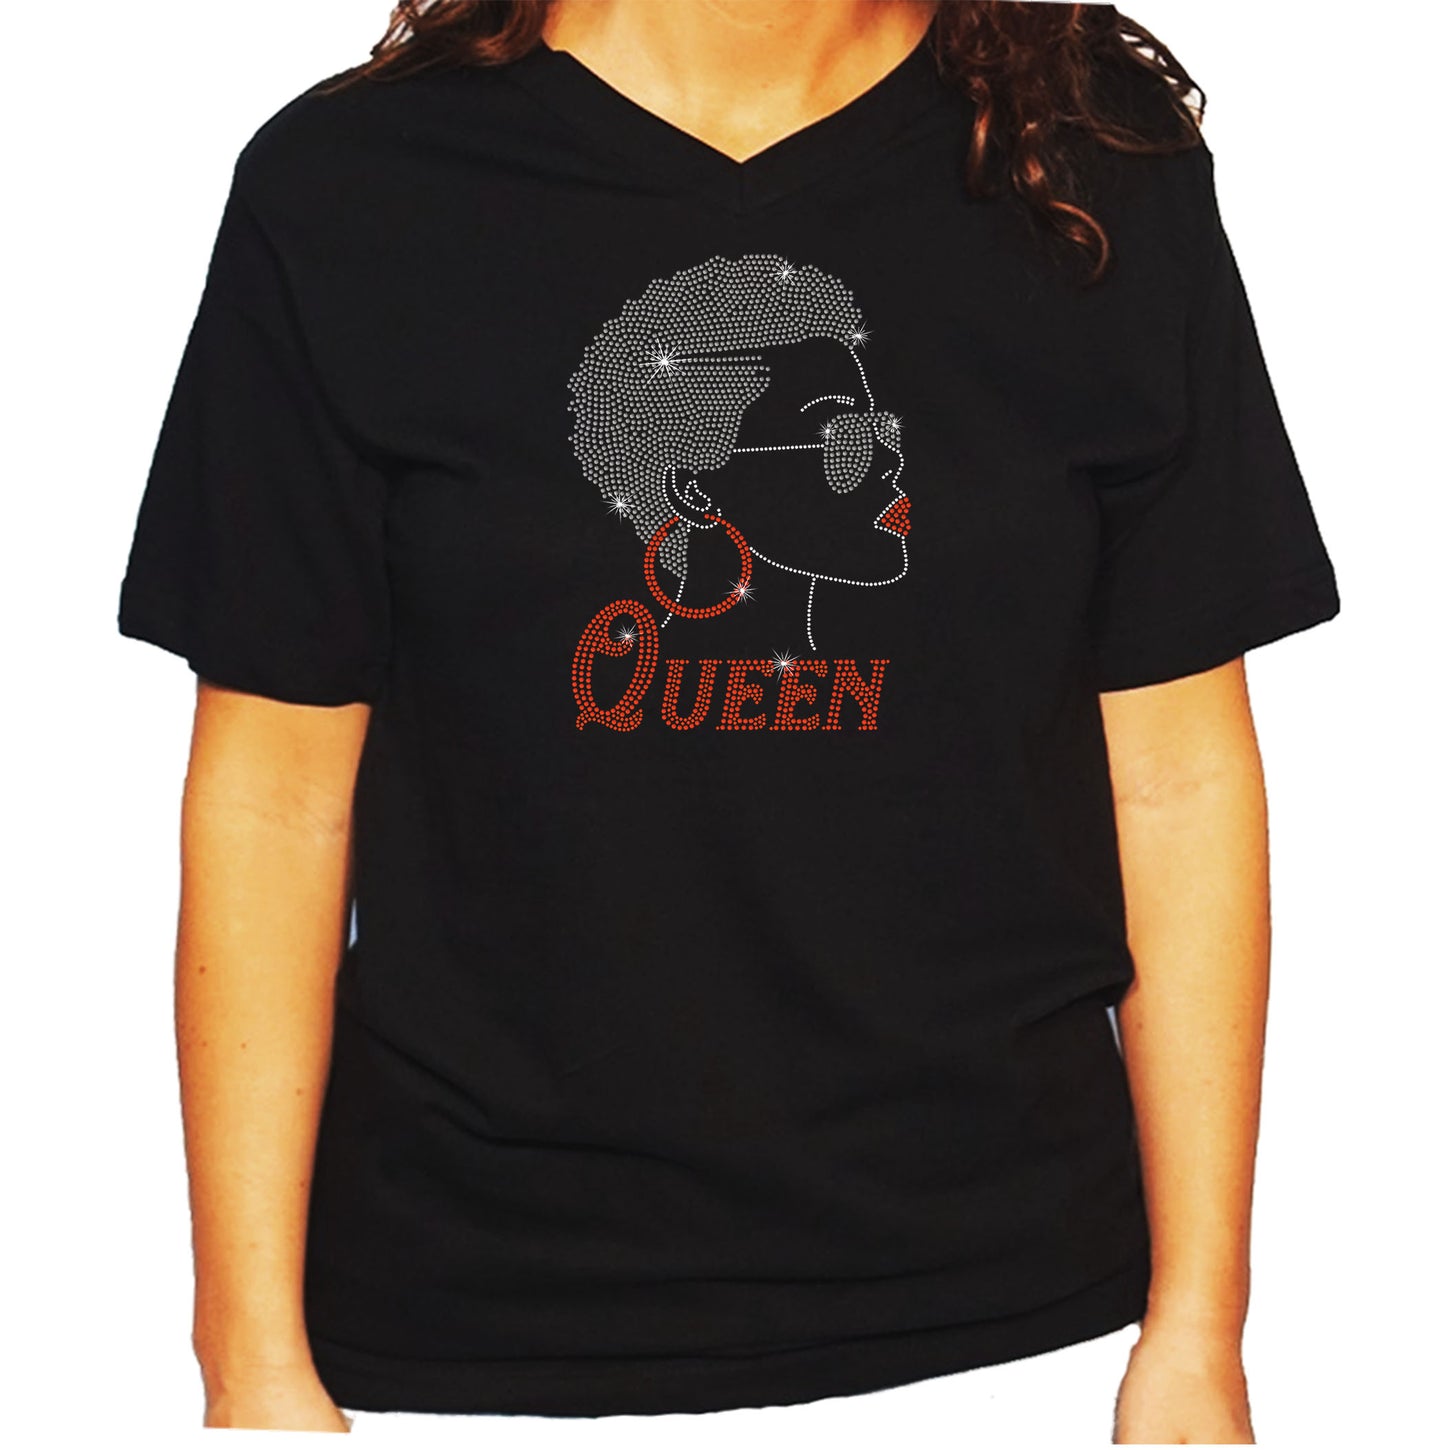 Women's/Unisex T-Shirt with Afro Girl with Short Hair and Glasses in Rhinestones - Hoop Earrings, Queen